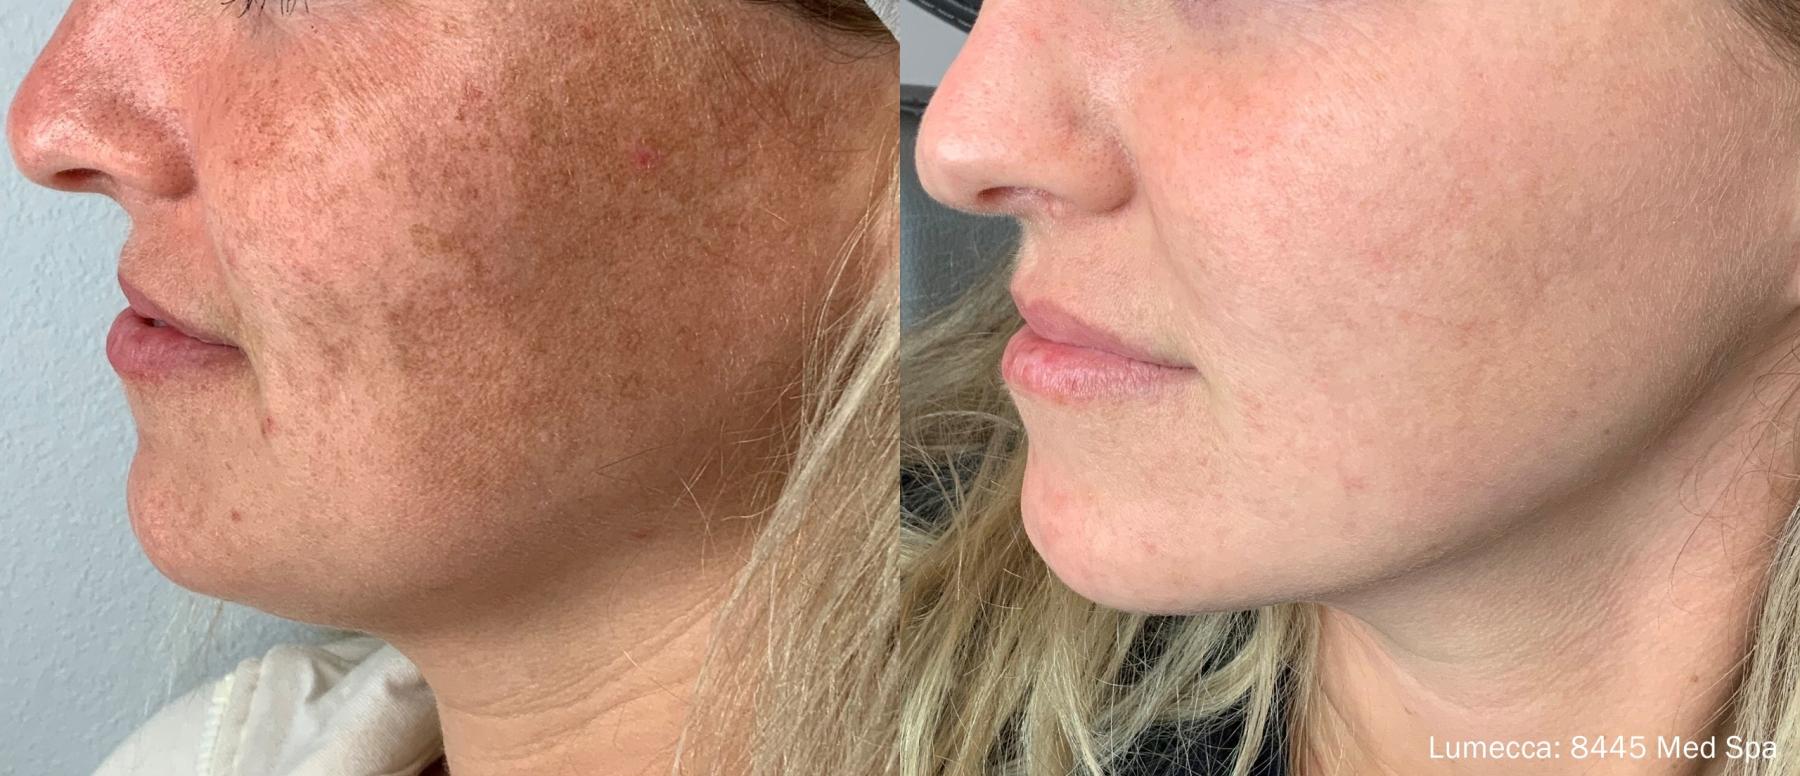 Lumecca IPL: Patient 2 - Before and After  